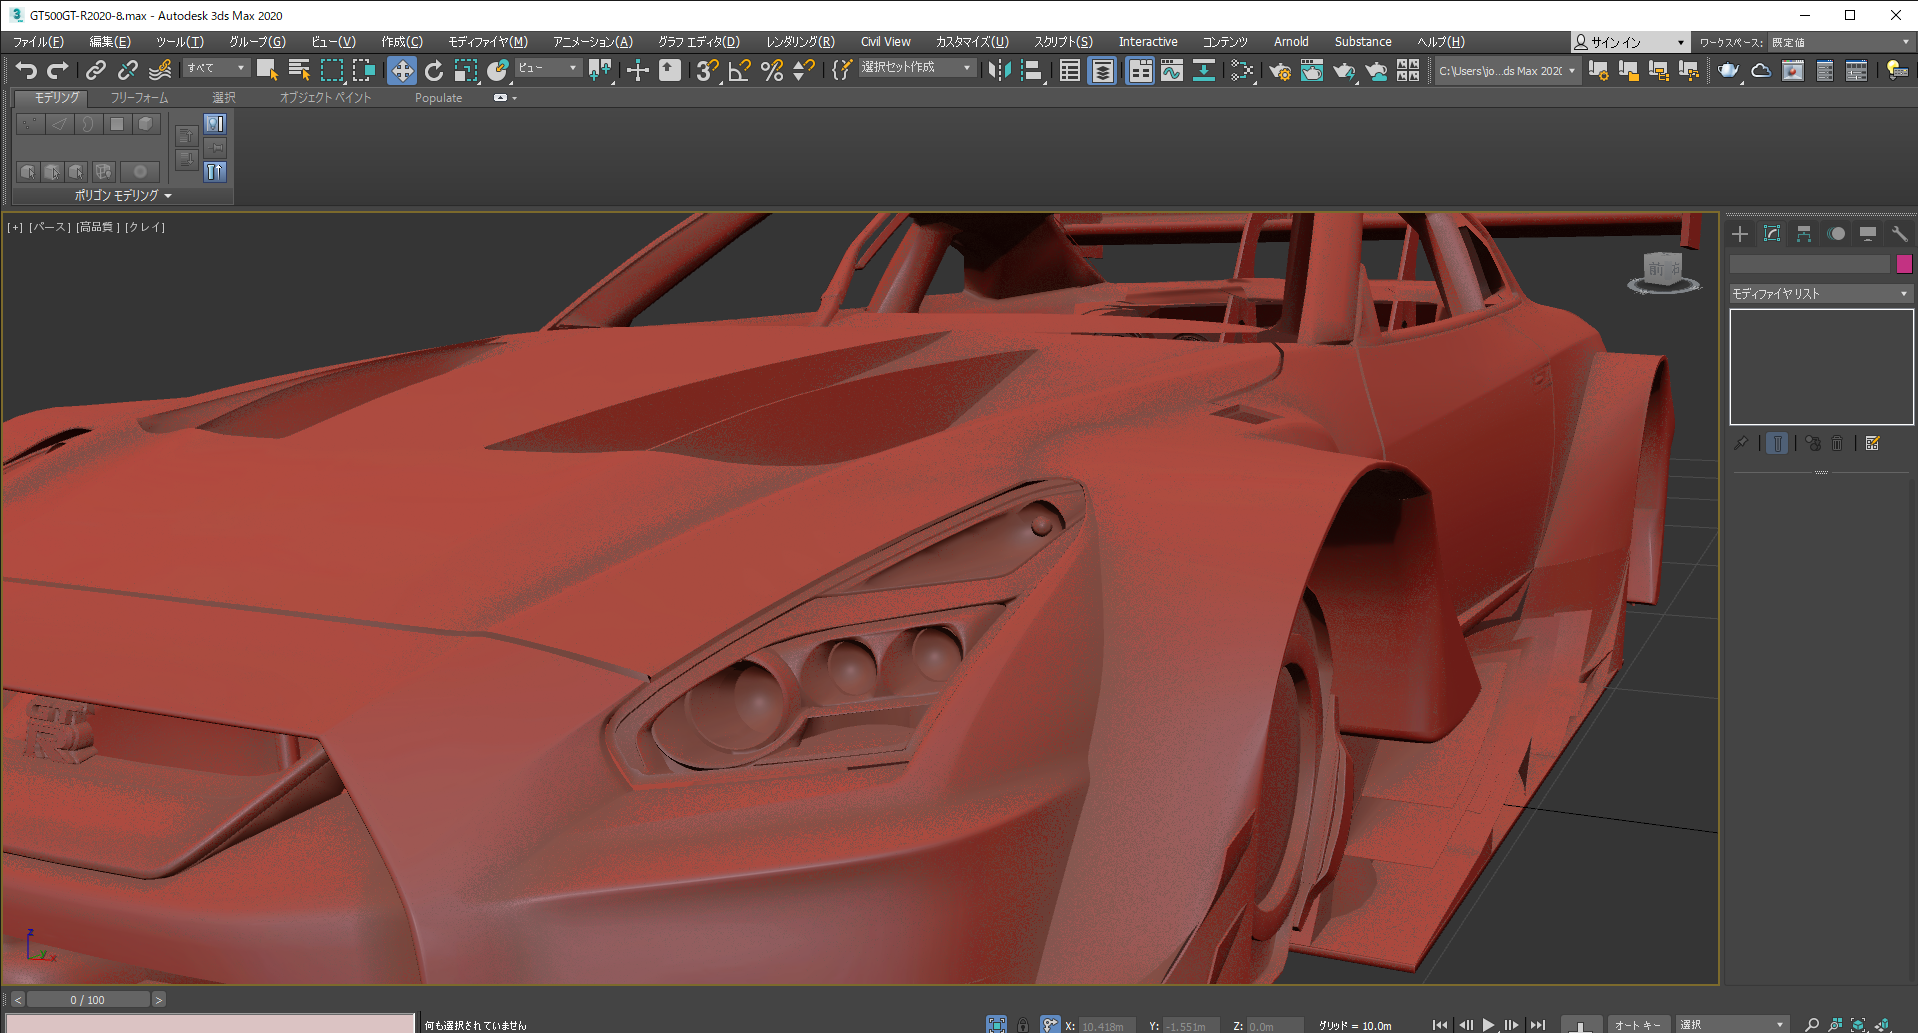 GT500GT-R2020-8.max - Autodesk 3ds Max 2020  2020_03_31 13_08_13.png